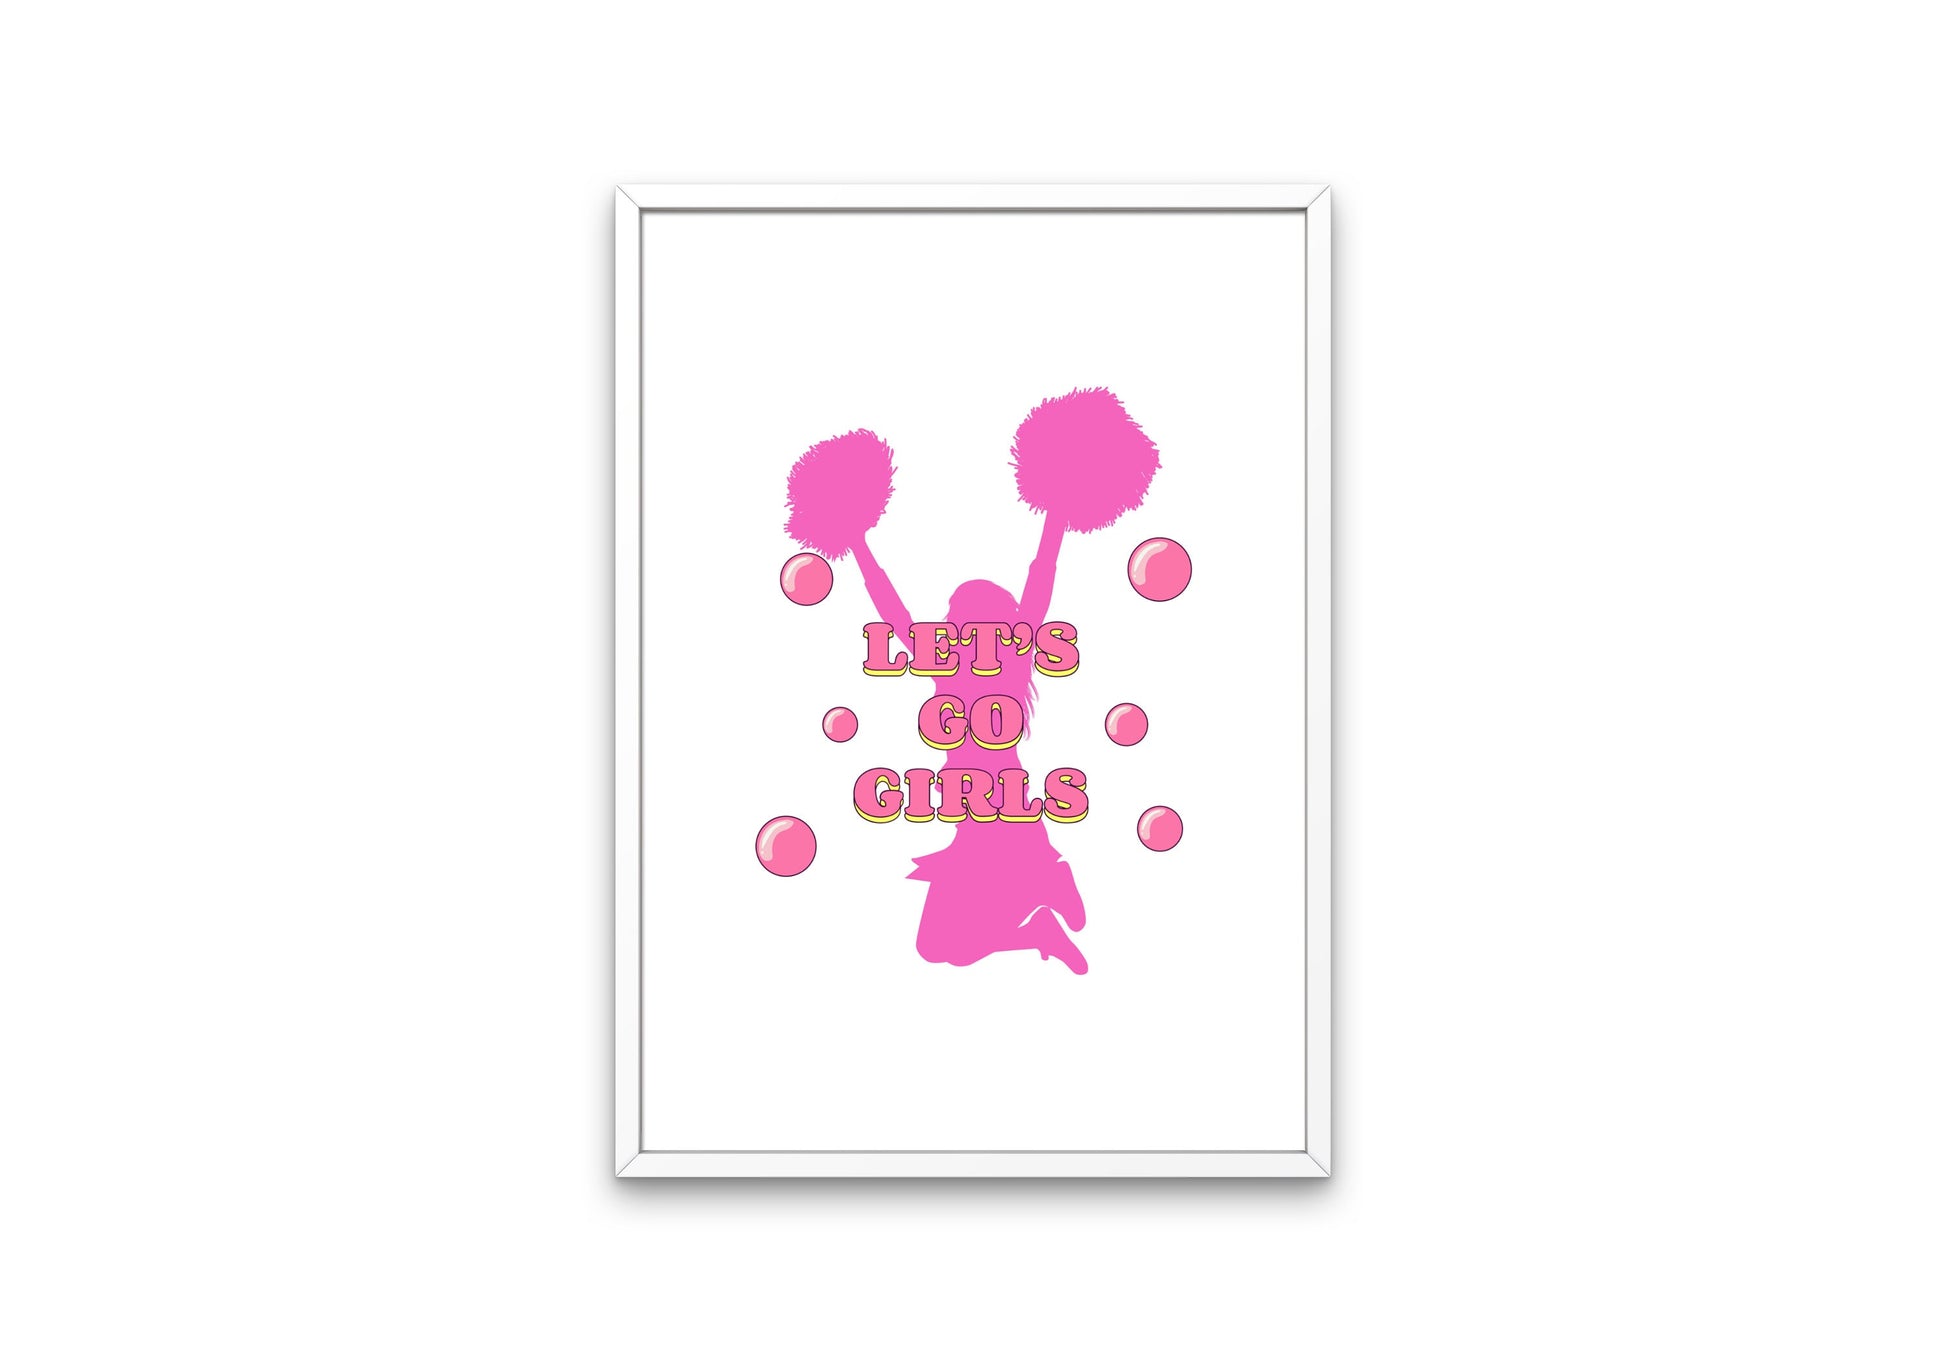 Let's Go Girls Cheerleader Poster INSTANT DOWNLOAD, one piece poster, Pink Preppy Wall Artdecor, Dorm Room Decor, Sports Academia aesthetic